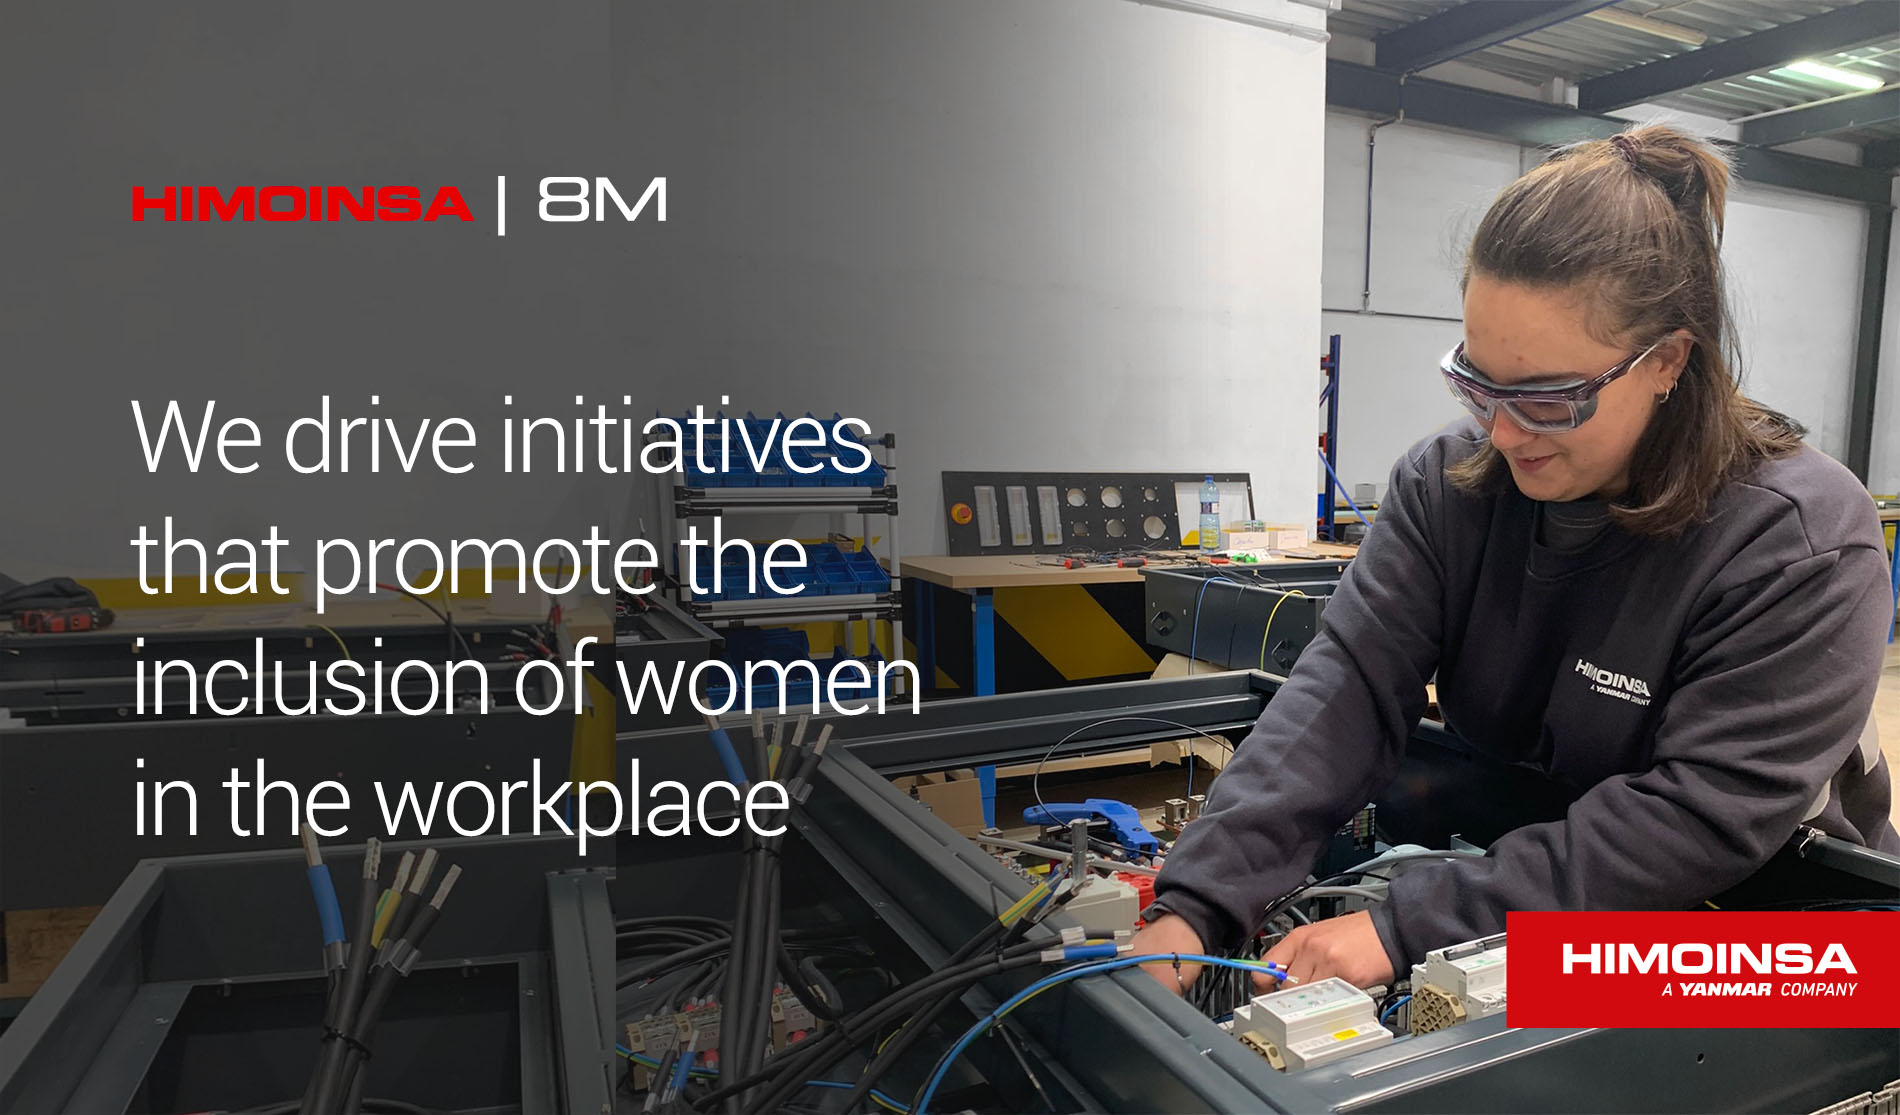 HIMOINSA collaborates in projects and drives initiatives that promote the inclusion of women in the workplace